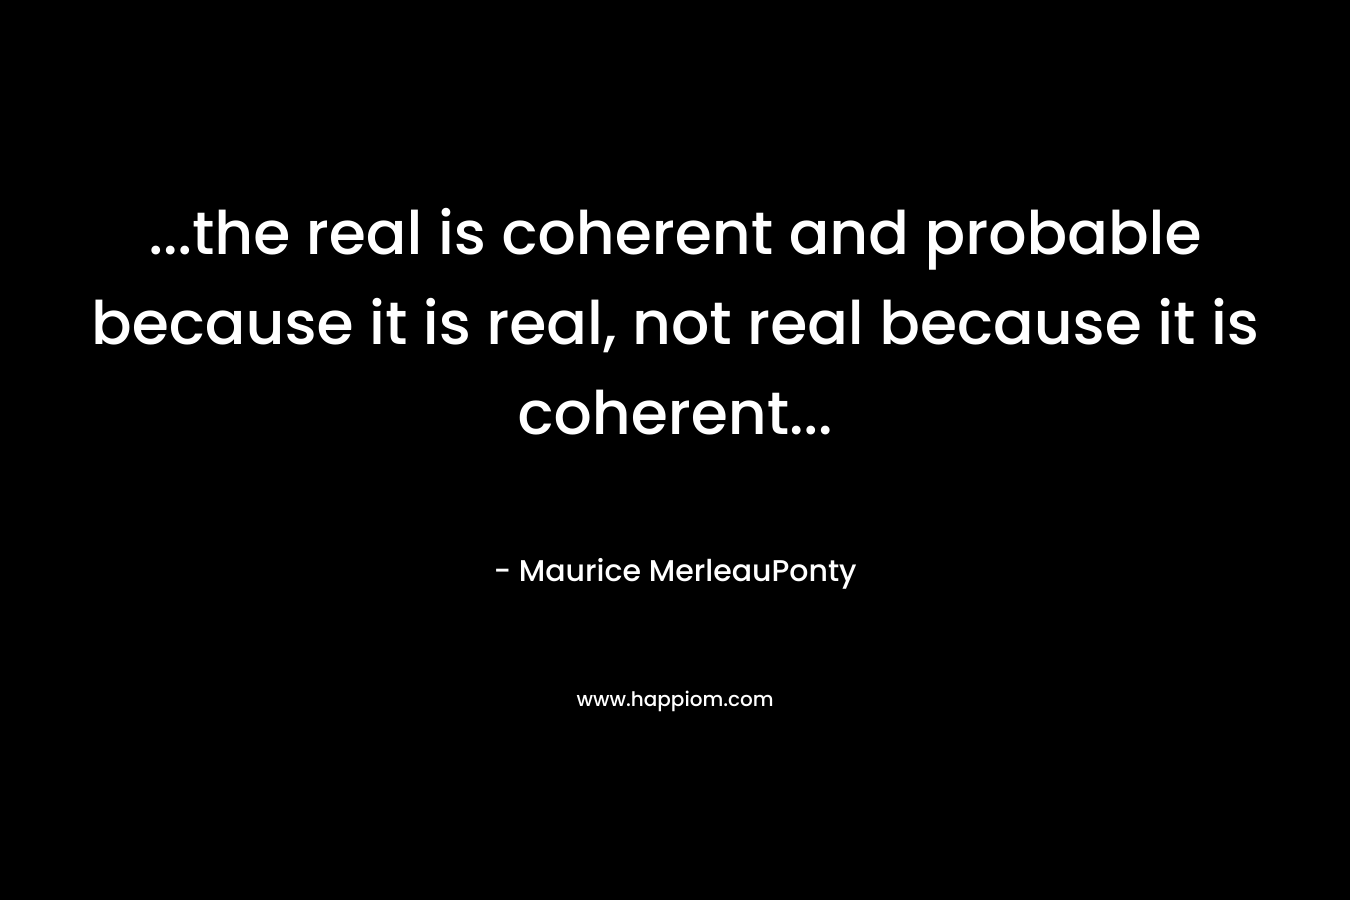 ...the real is coherent and probable because it is real, not real because it is coherent...